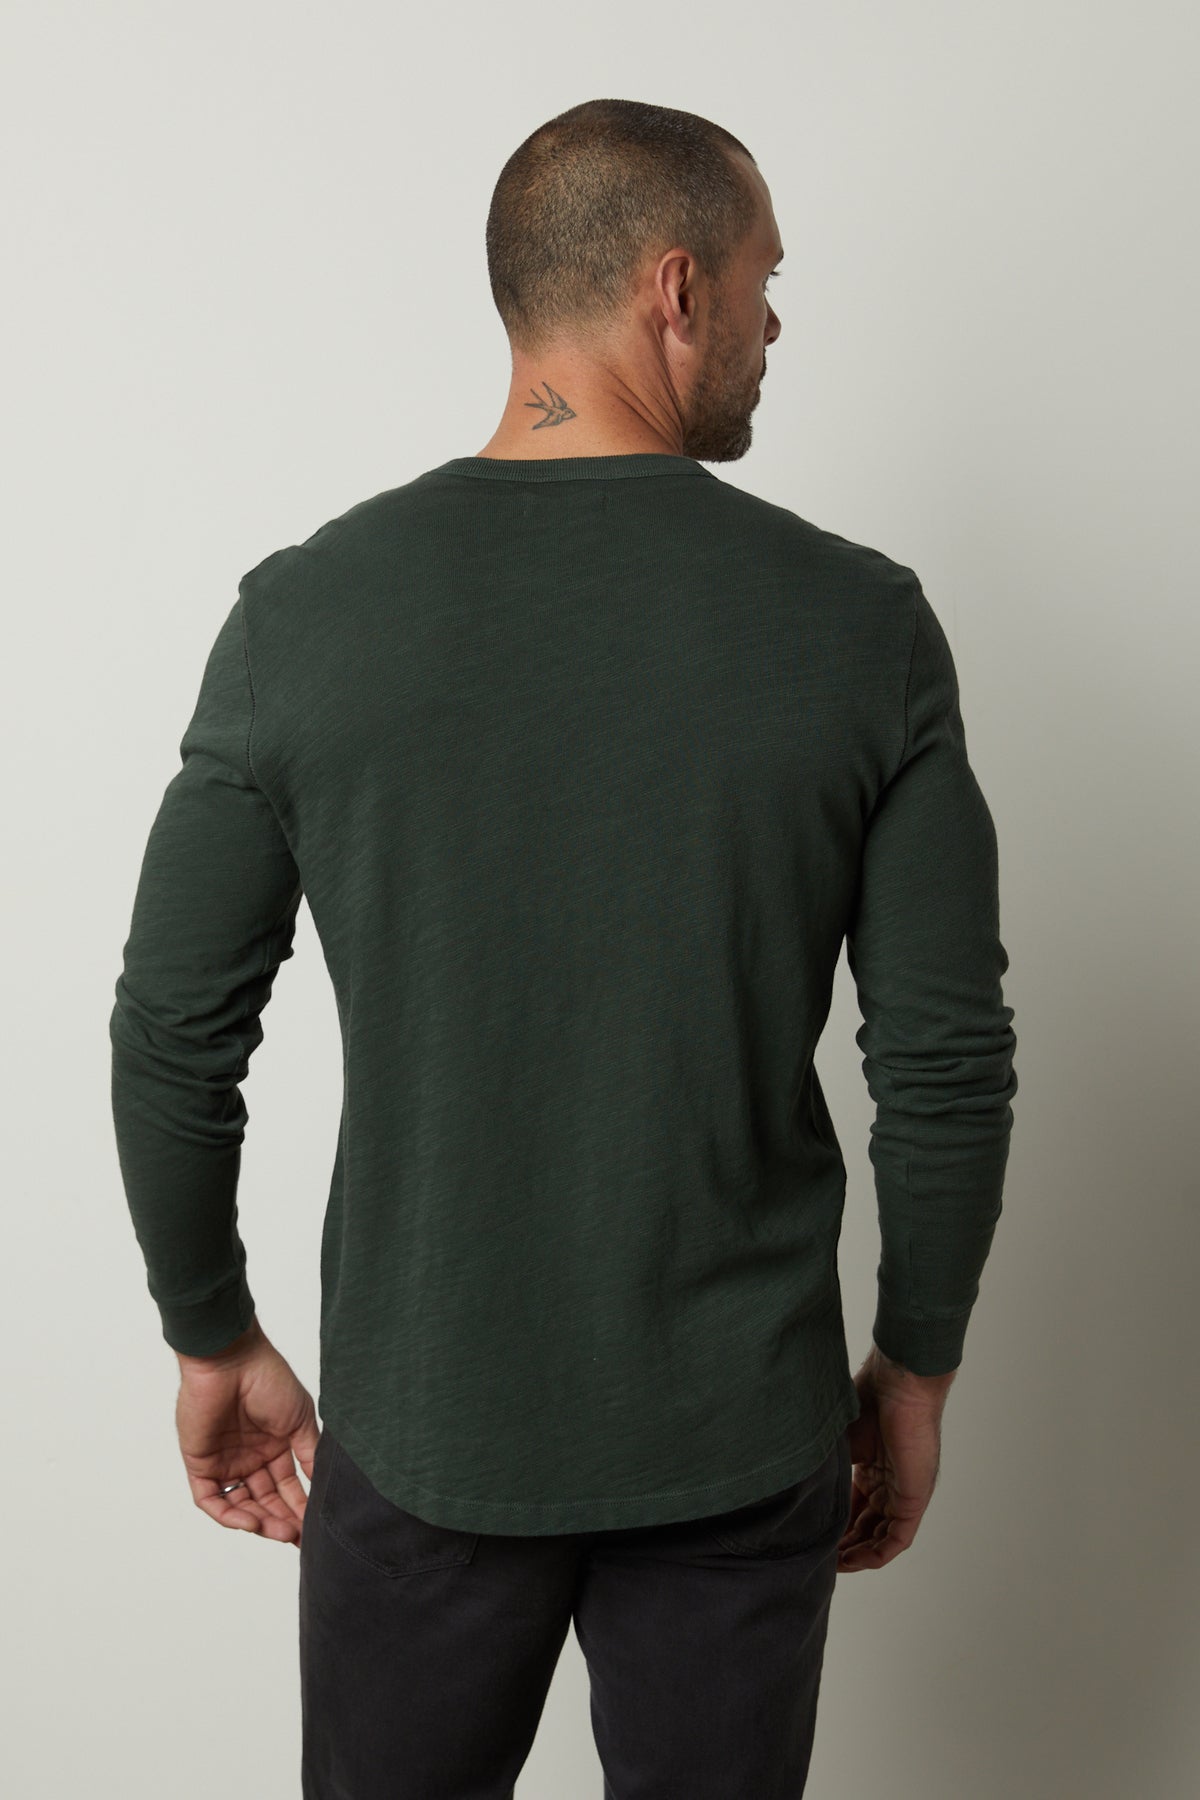 The back view of a man wearing a PALMER CREW NECK TEE made by Velvet by Graham & Spencer, made of soft cotton slub knit, with ribbed neckline and cuffs.-35662670495937